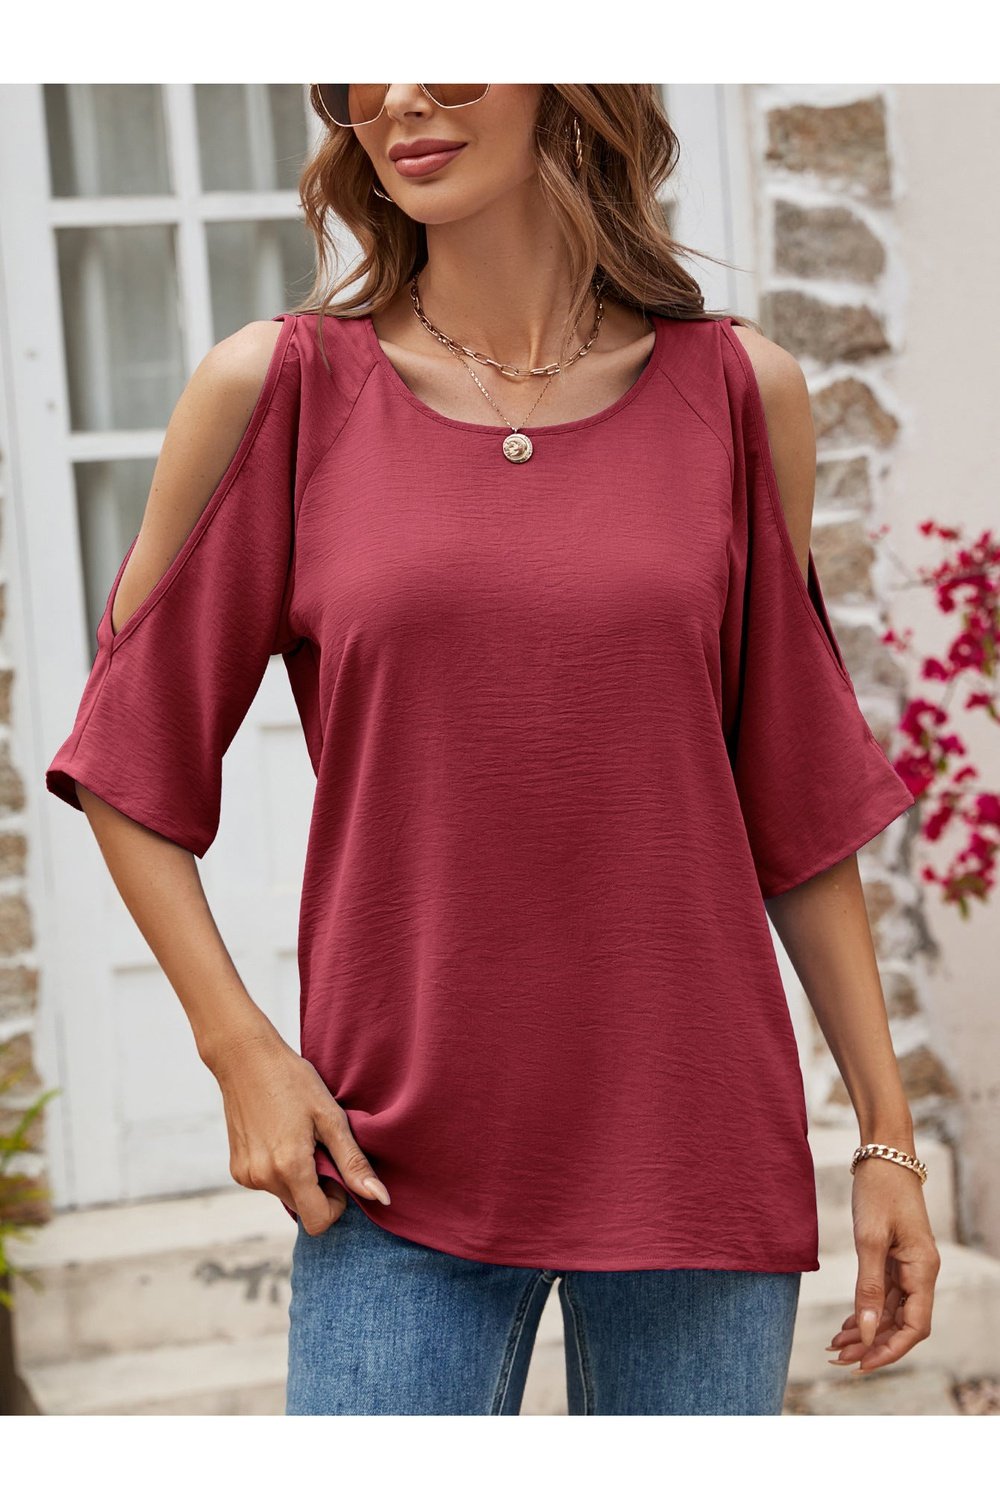 Textured Round Neck Split Sleeve Top - T-Shirts - FITGGINS